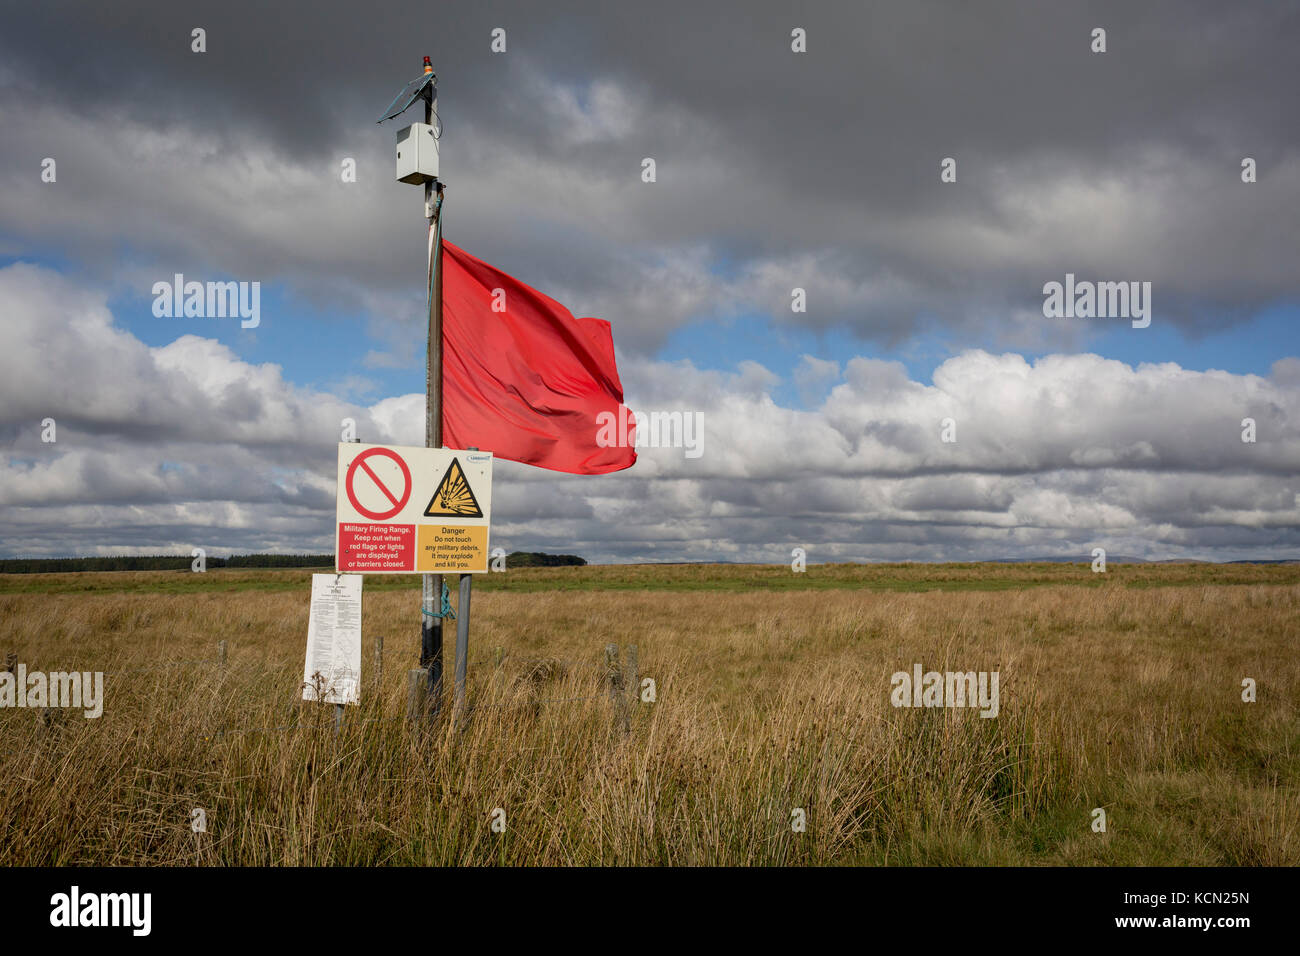 A red warning flag flies on the perimeter during military live firing at Otterburn Ranges, on 28th September 2017, in Otterburn, Northumberland, England. Twenty-three per cent of Northumberland National Park is owned by the Ministry of Defence and used as a military training area though they encourage as much access to the area as possible. Sometimes areas are cordoned off from the public for military exercises. Visitors are welcome outside of live firing times if no red flags are displayed. When military exercises are happening, red flags around the boundaries indicate restricted access. Visi Stock Photo